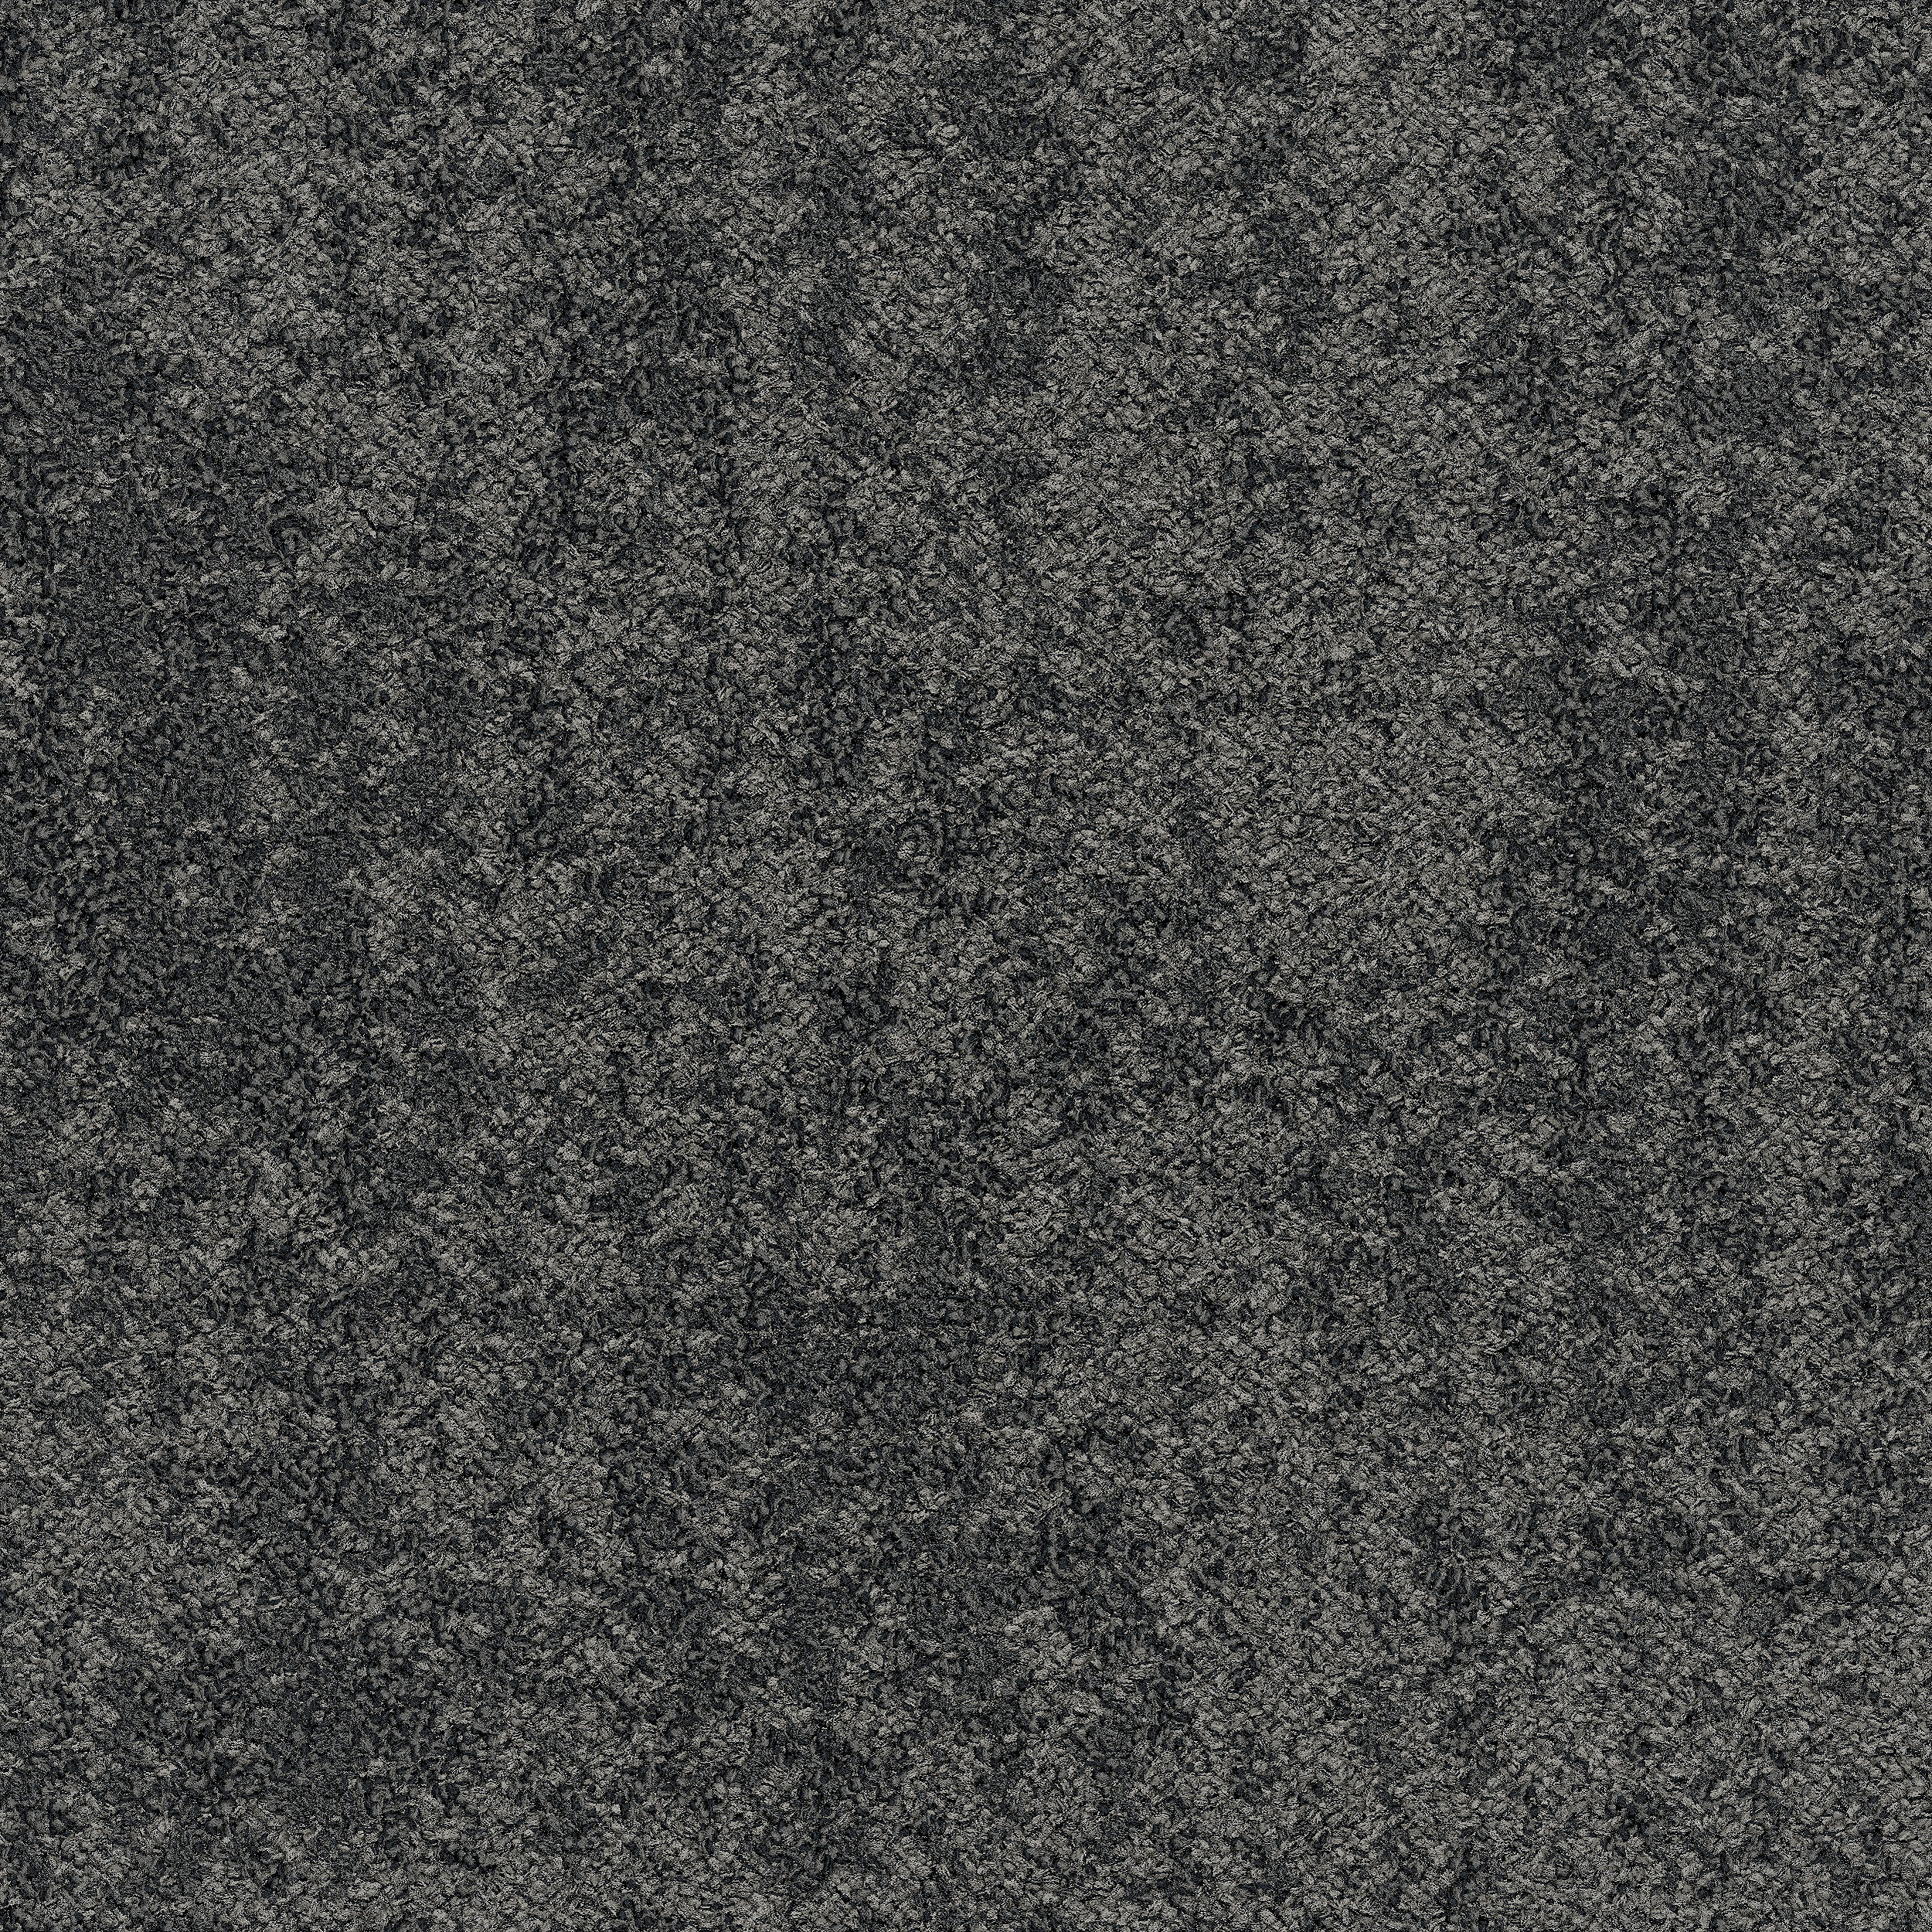 Perfect Pair Carpet Tile in Grayscale image number 3